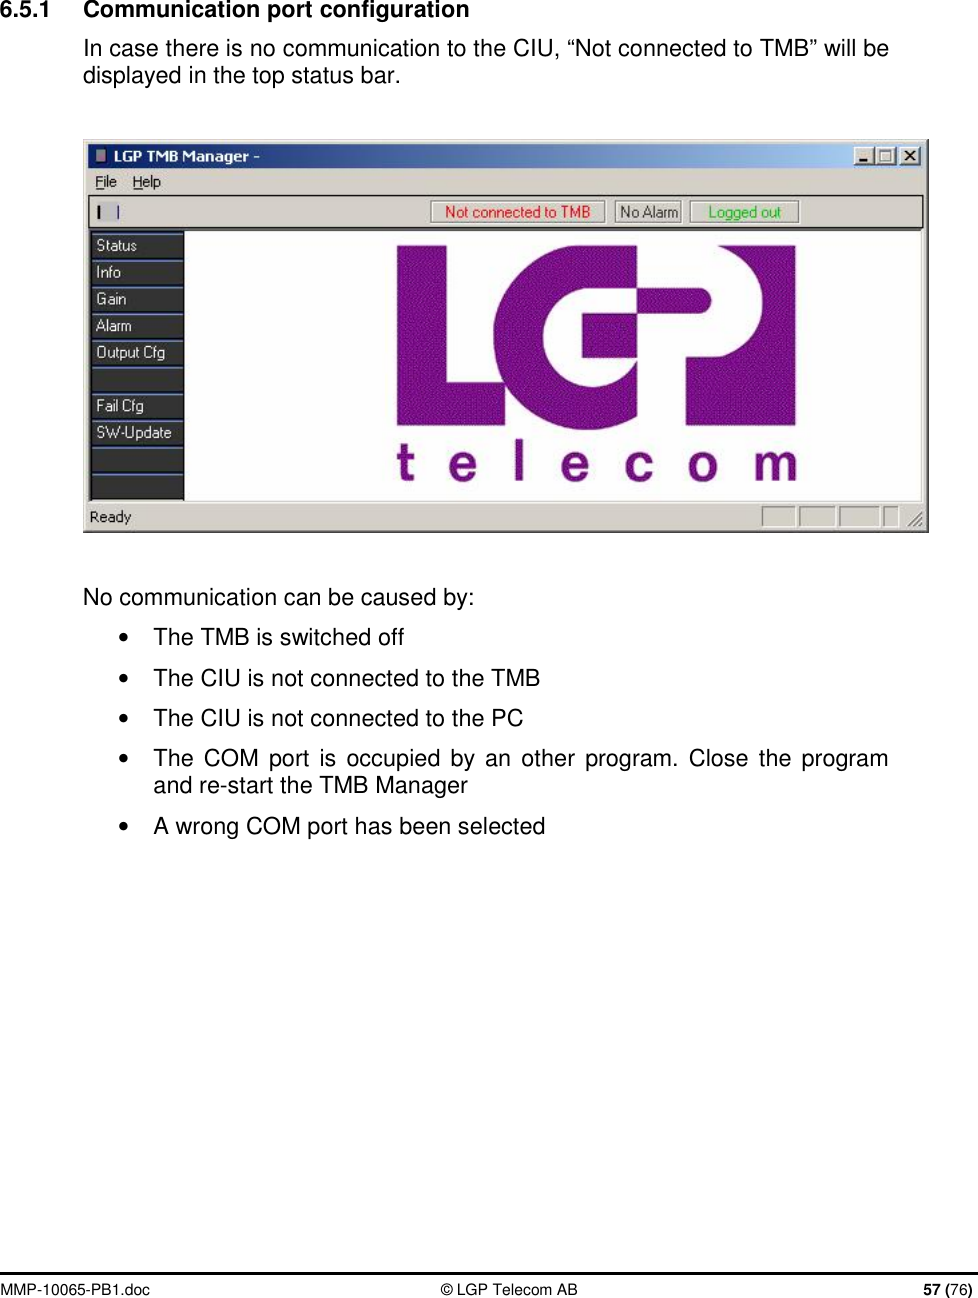  MMP-10065-PB1.doc  © LGP Telecom AB  57 (76)    6.5.1  Communication port configuration In case there is no communication to the CIU, “Not connected to TMB” will be displayed in the top status bar.    No communication can be caused by: • The TMB is switched off • The CIU is not connected to the TMB • The CIU is not connected to the PC •  The COM port is occupied by an other program. Close the program and re-start the TMB Manager •  A wrong COM port has been selected 